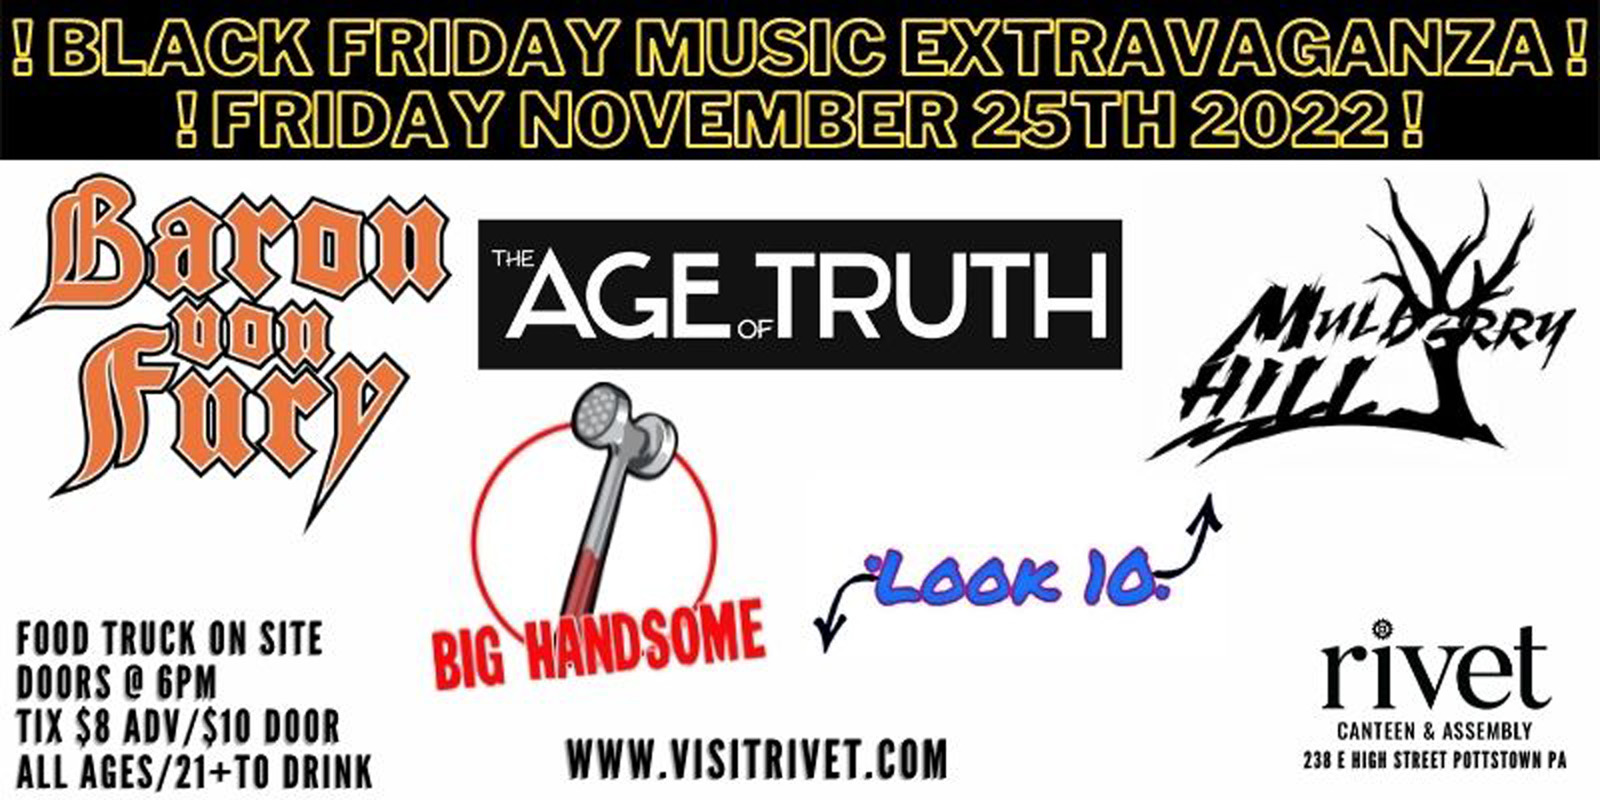 Baron Von Fury, The Age of Truth, Mulberry Hill, Big Handsome, and Look 10 performing live at Rivet: Canteen & Assembly on Friday, November 25th!